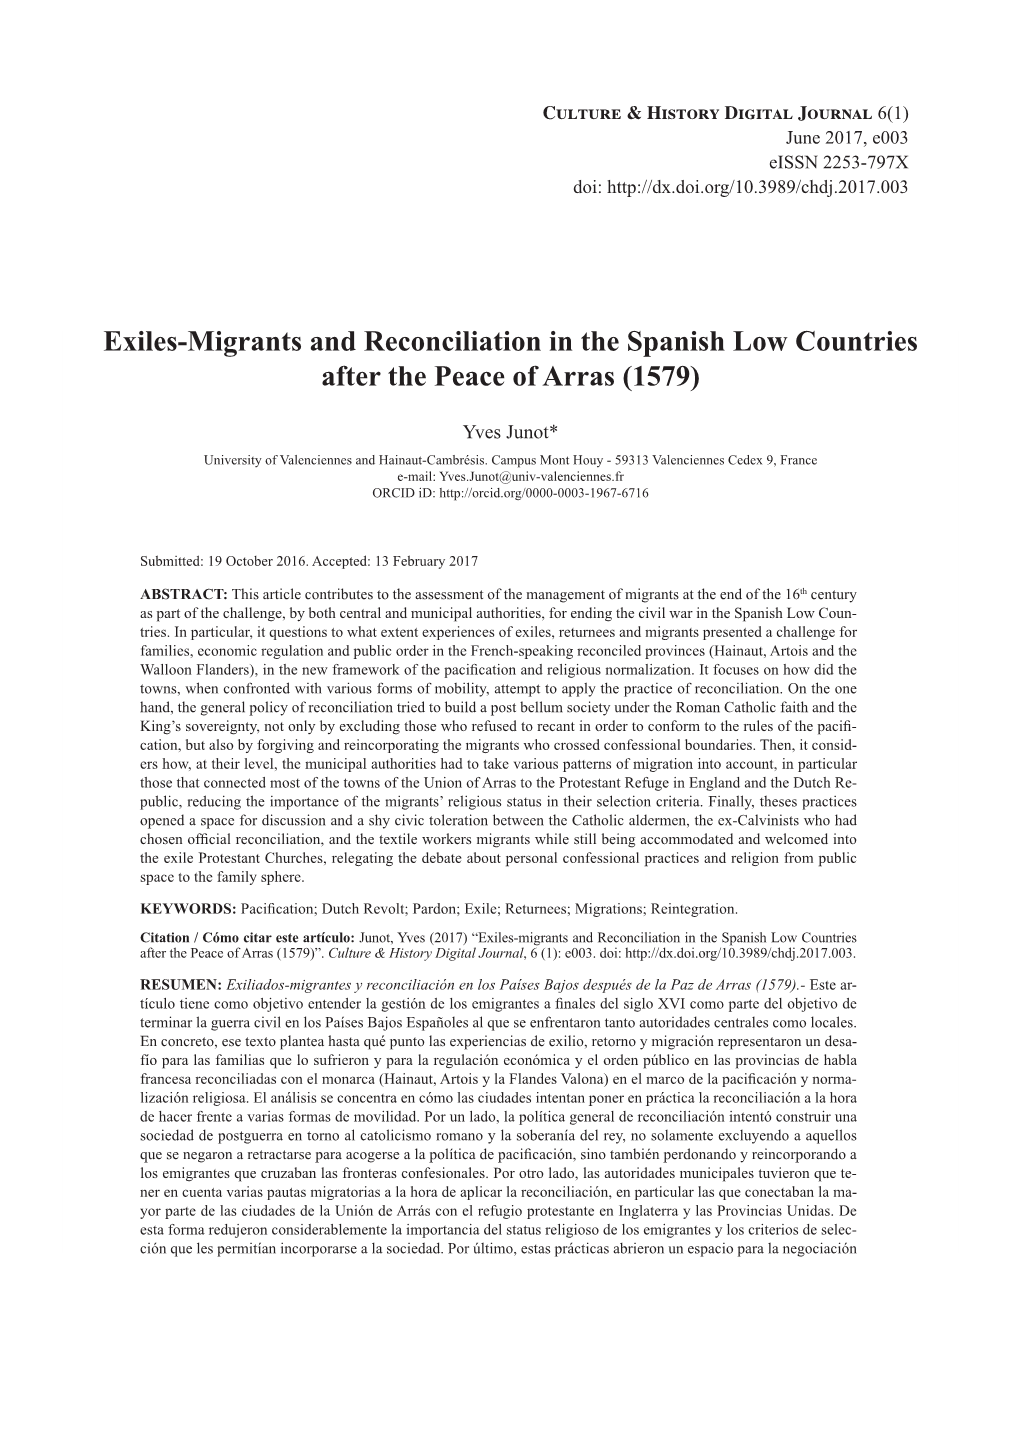 Exiles-Migrants and Reconciliation in the Spanish Low Countries After the Peace of Arras (1579)